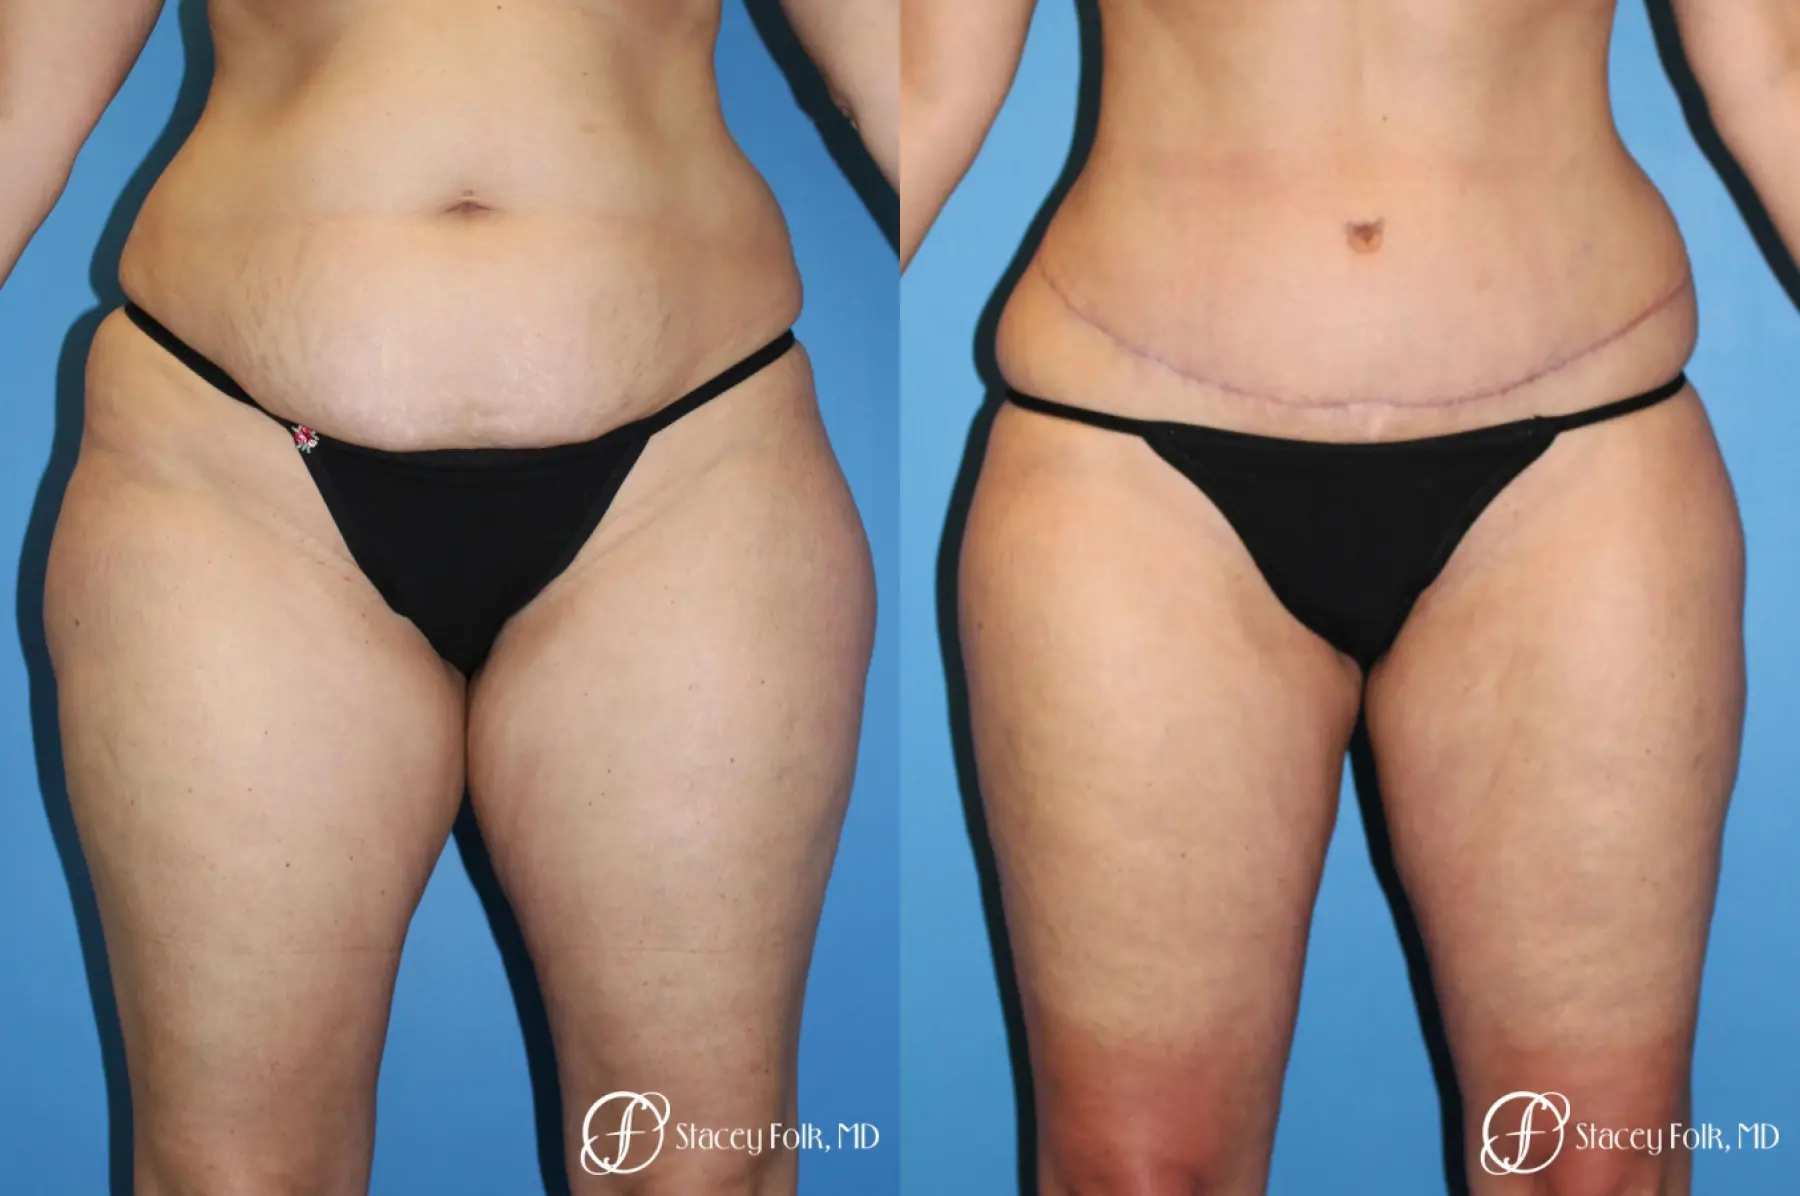 Tummy Tuck - Abdominoplasty - Before and After